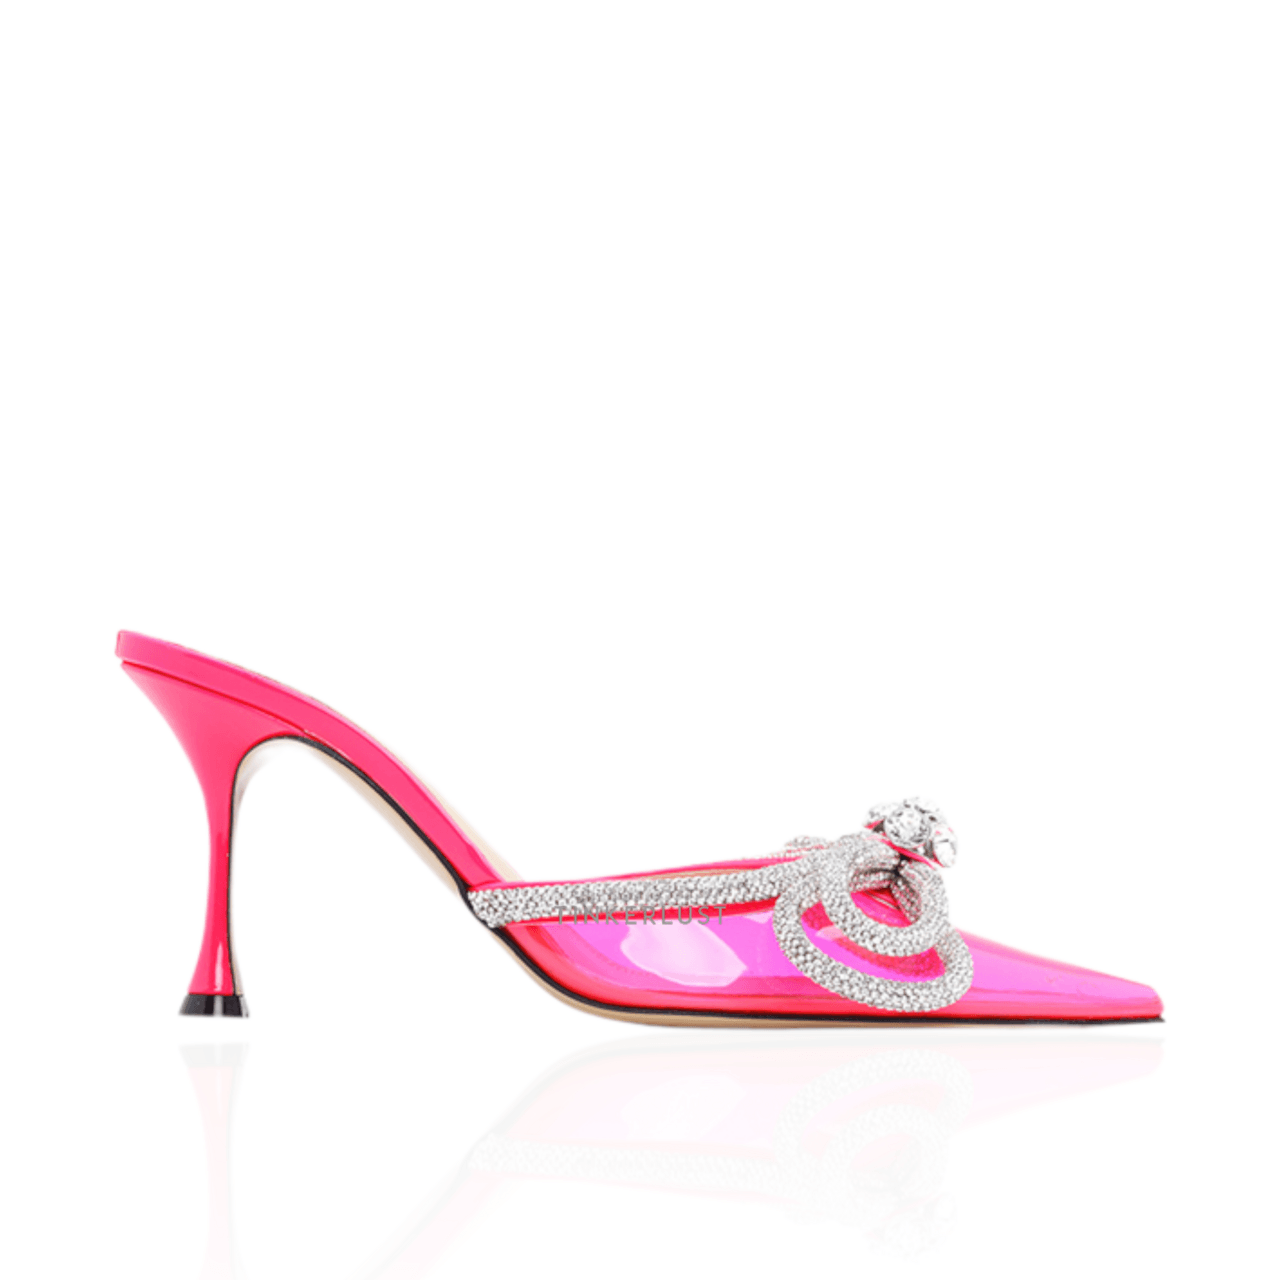 MACH & MACH Women Crystal Double Bow Pointed Toe PVC Mules 85mm in Pink